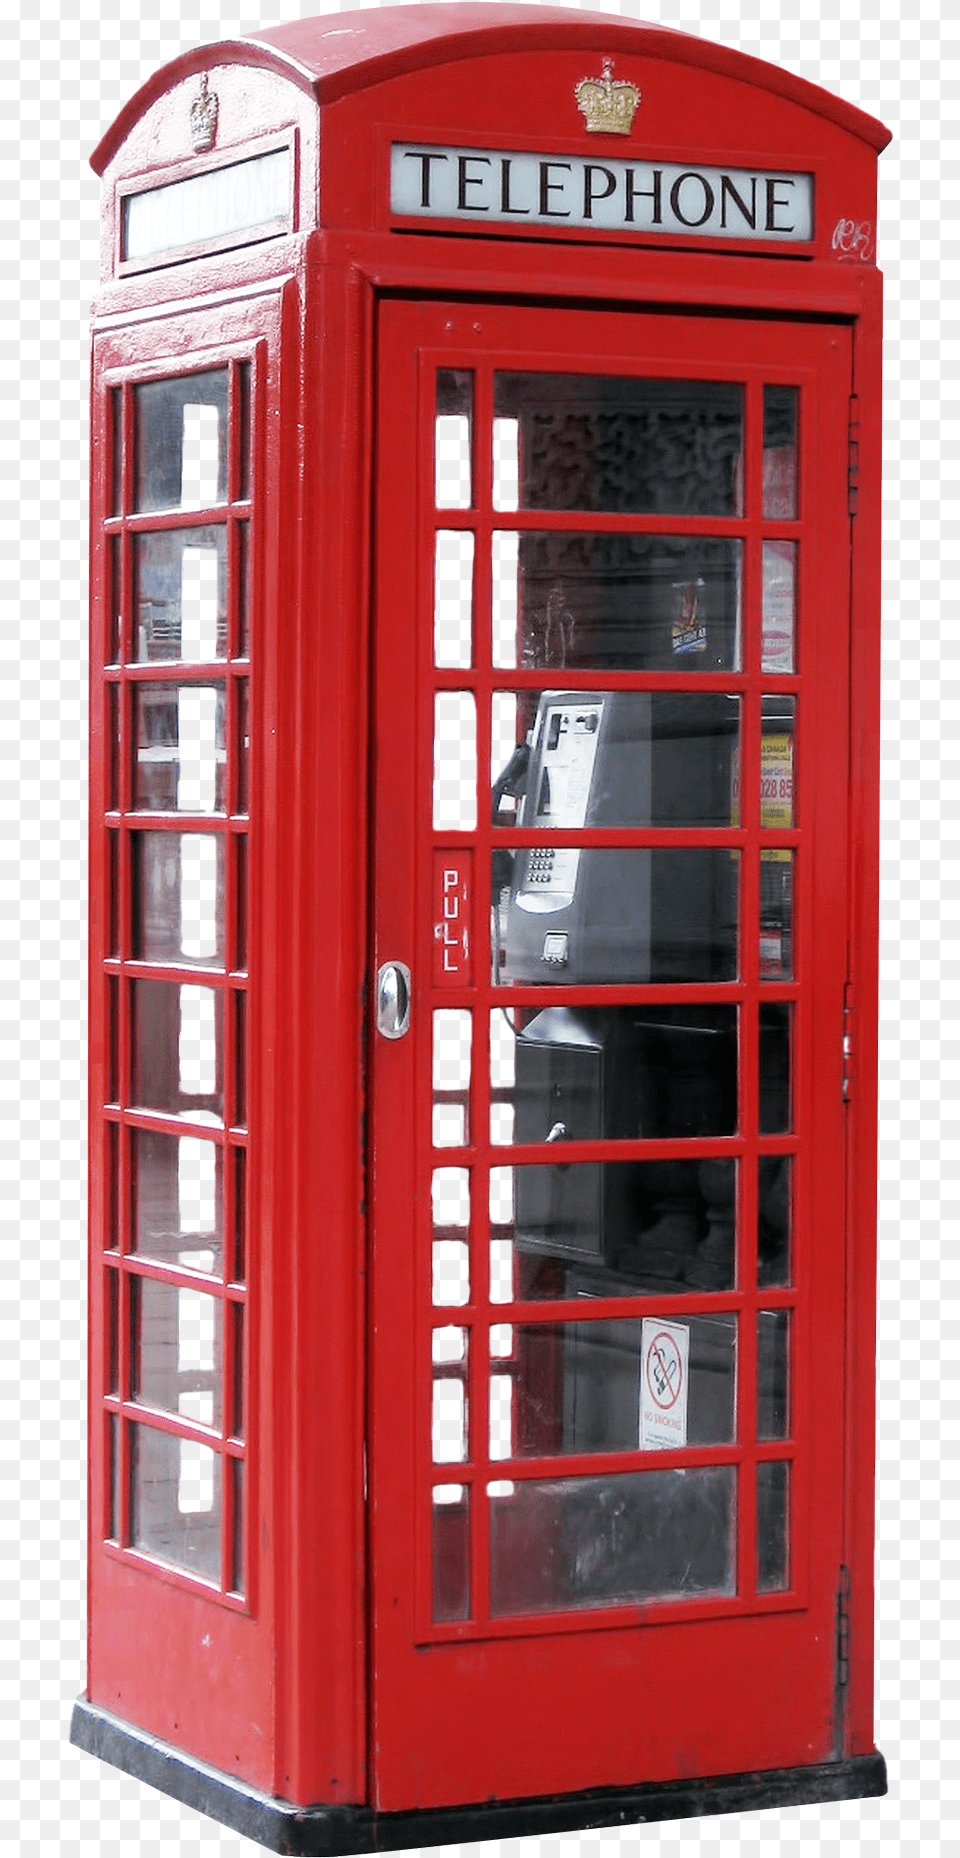 Telephone Booth Image Phone London Telephone Booth, Kiosk, Phone Booth Free Png Download